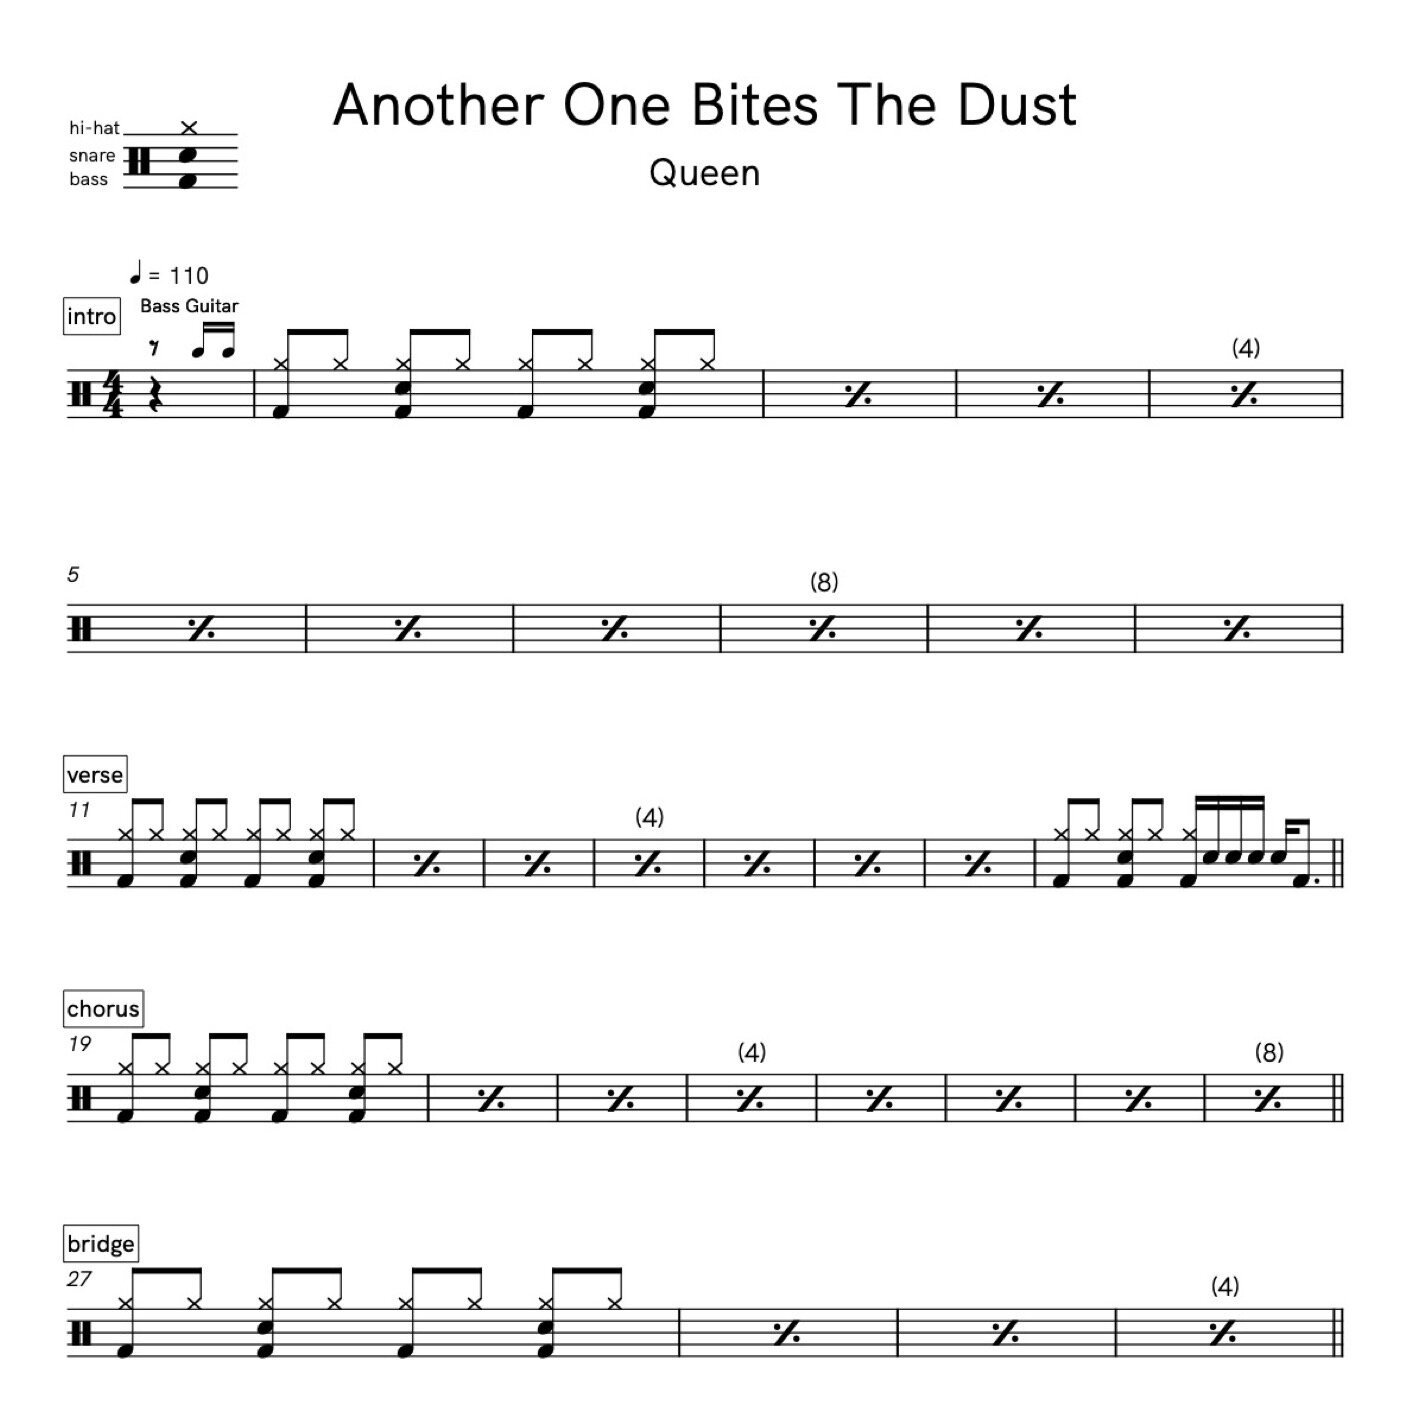 Another One Bites The Dust - Queen  Drum Transcription Notes — Ross Farley